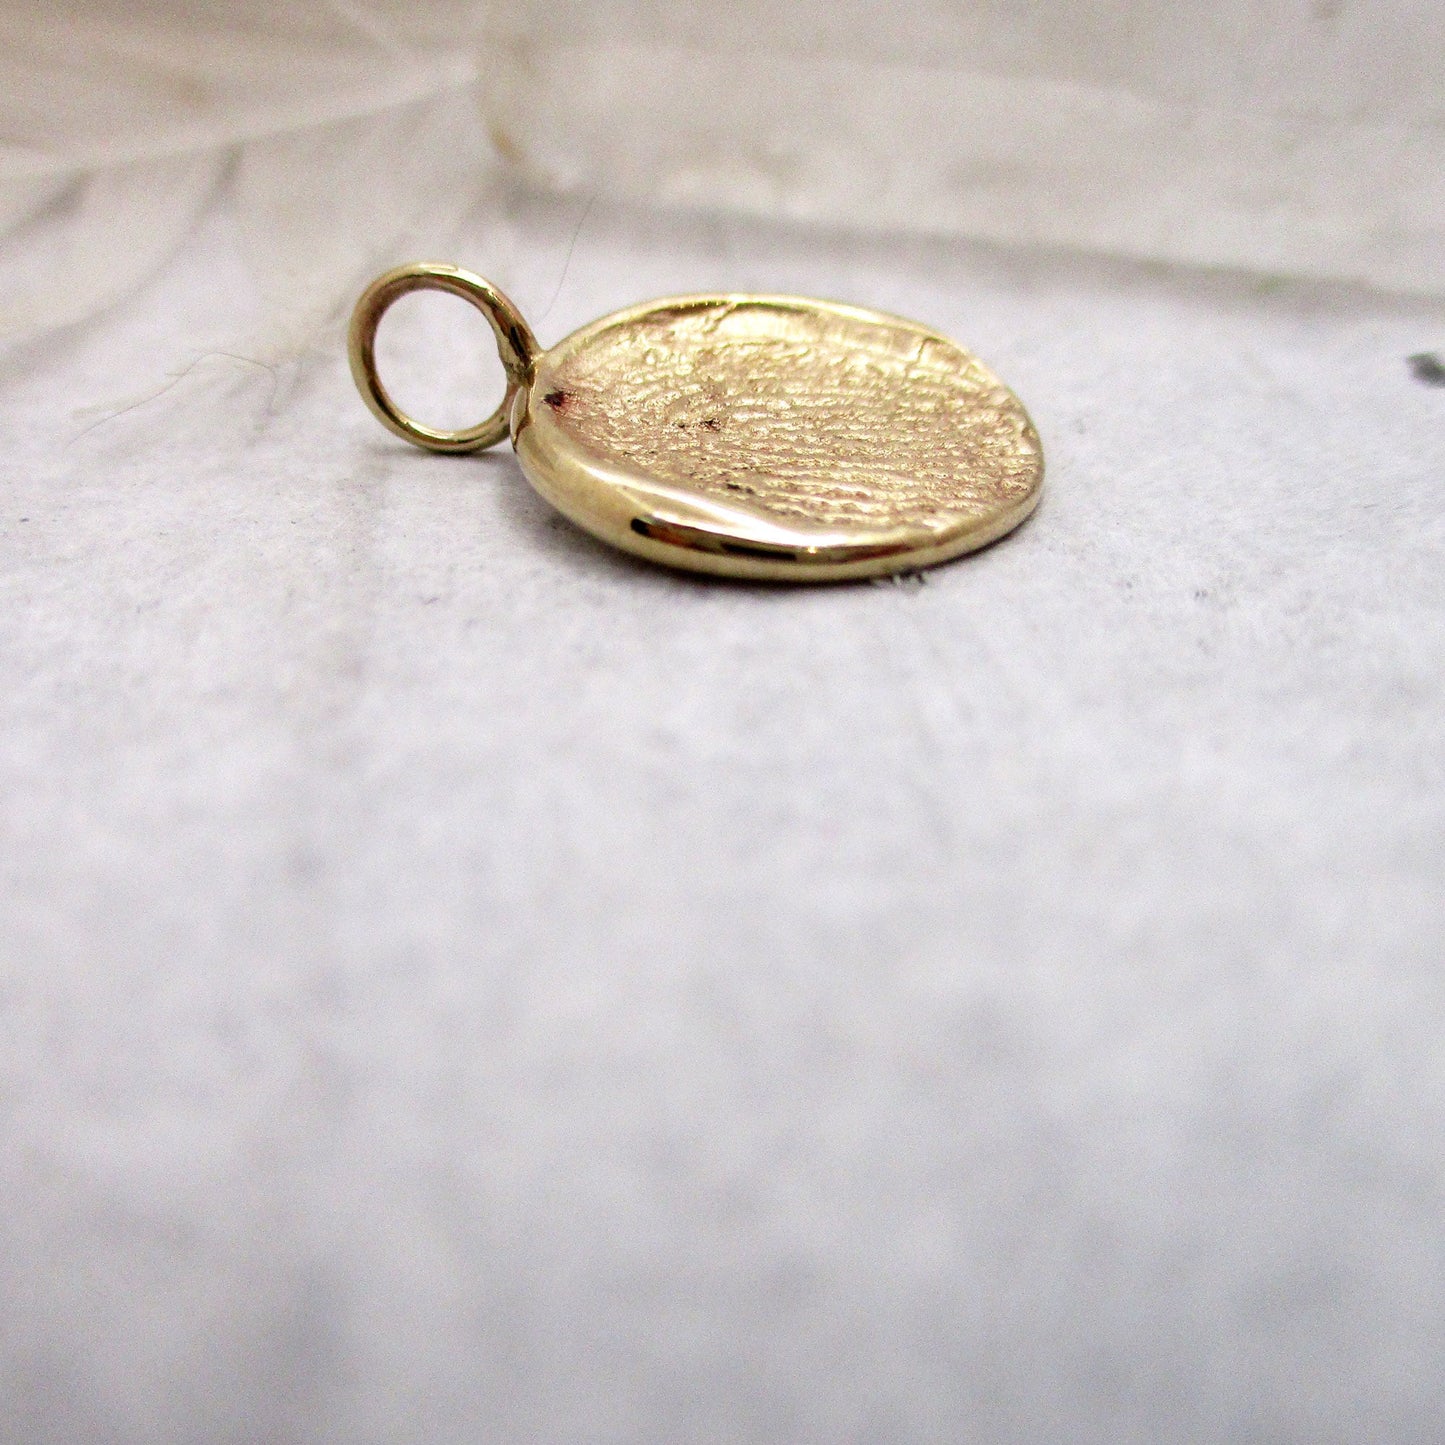 Small Size Solid 14k Gold Organic Shaped Fingerprint Pendant from Digital Image, Email your fingerprint image, Memorial fingerprint Pendant